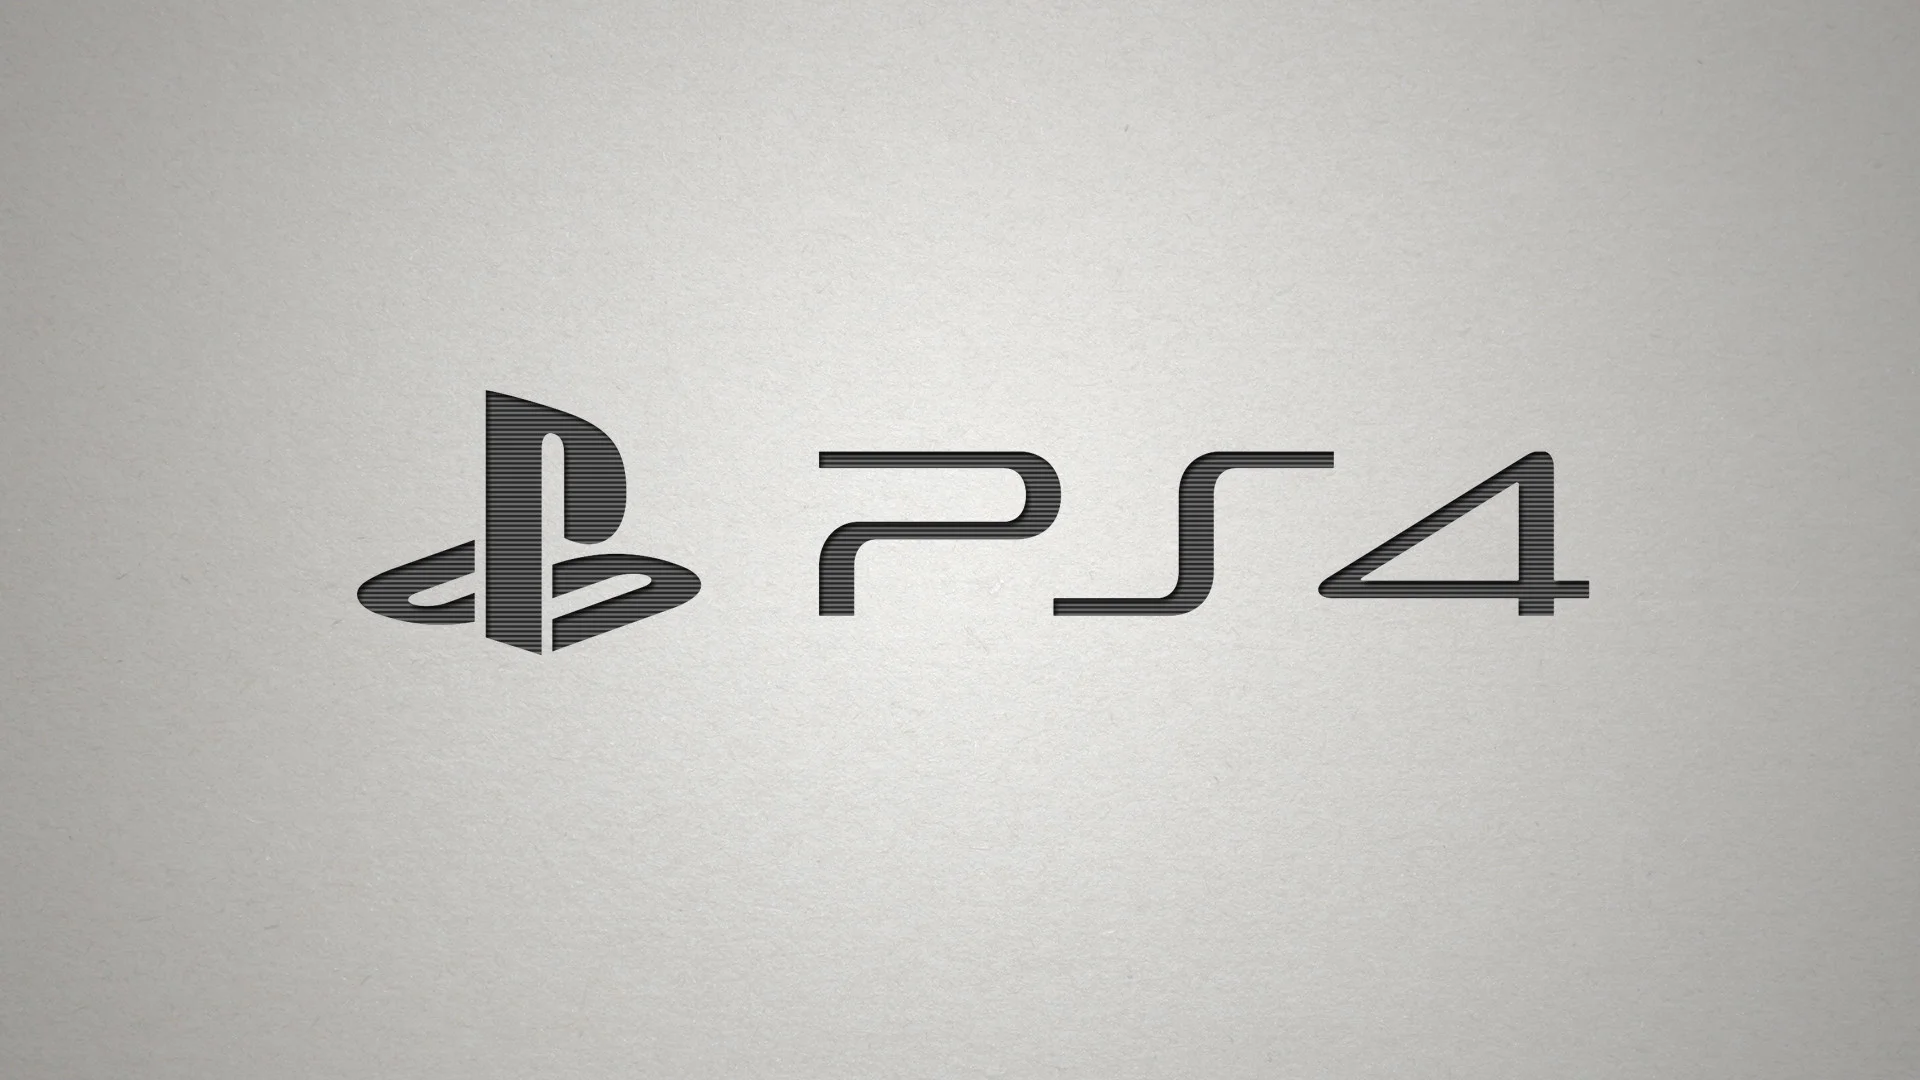 Video Game – Playstation 4 Wallpaper